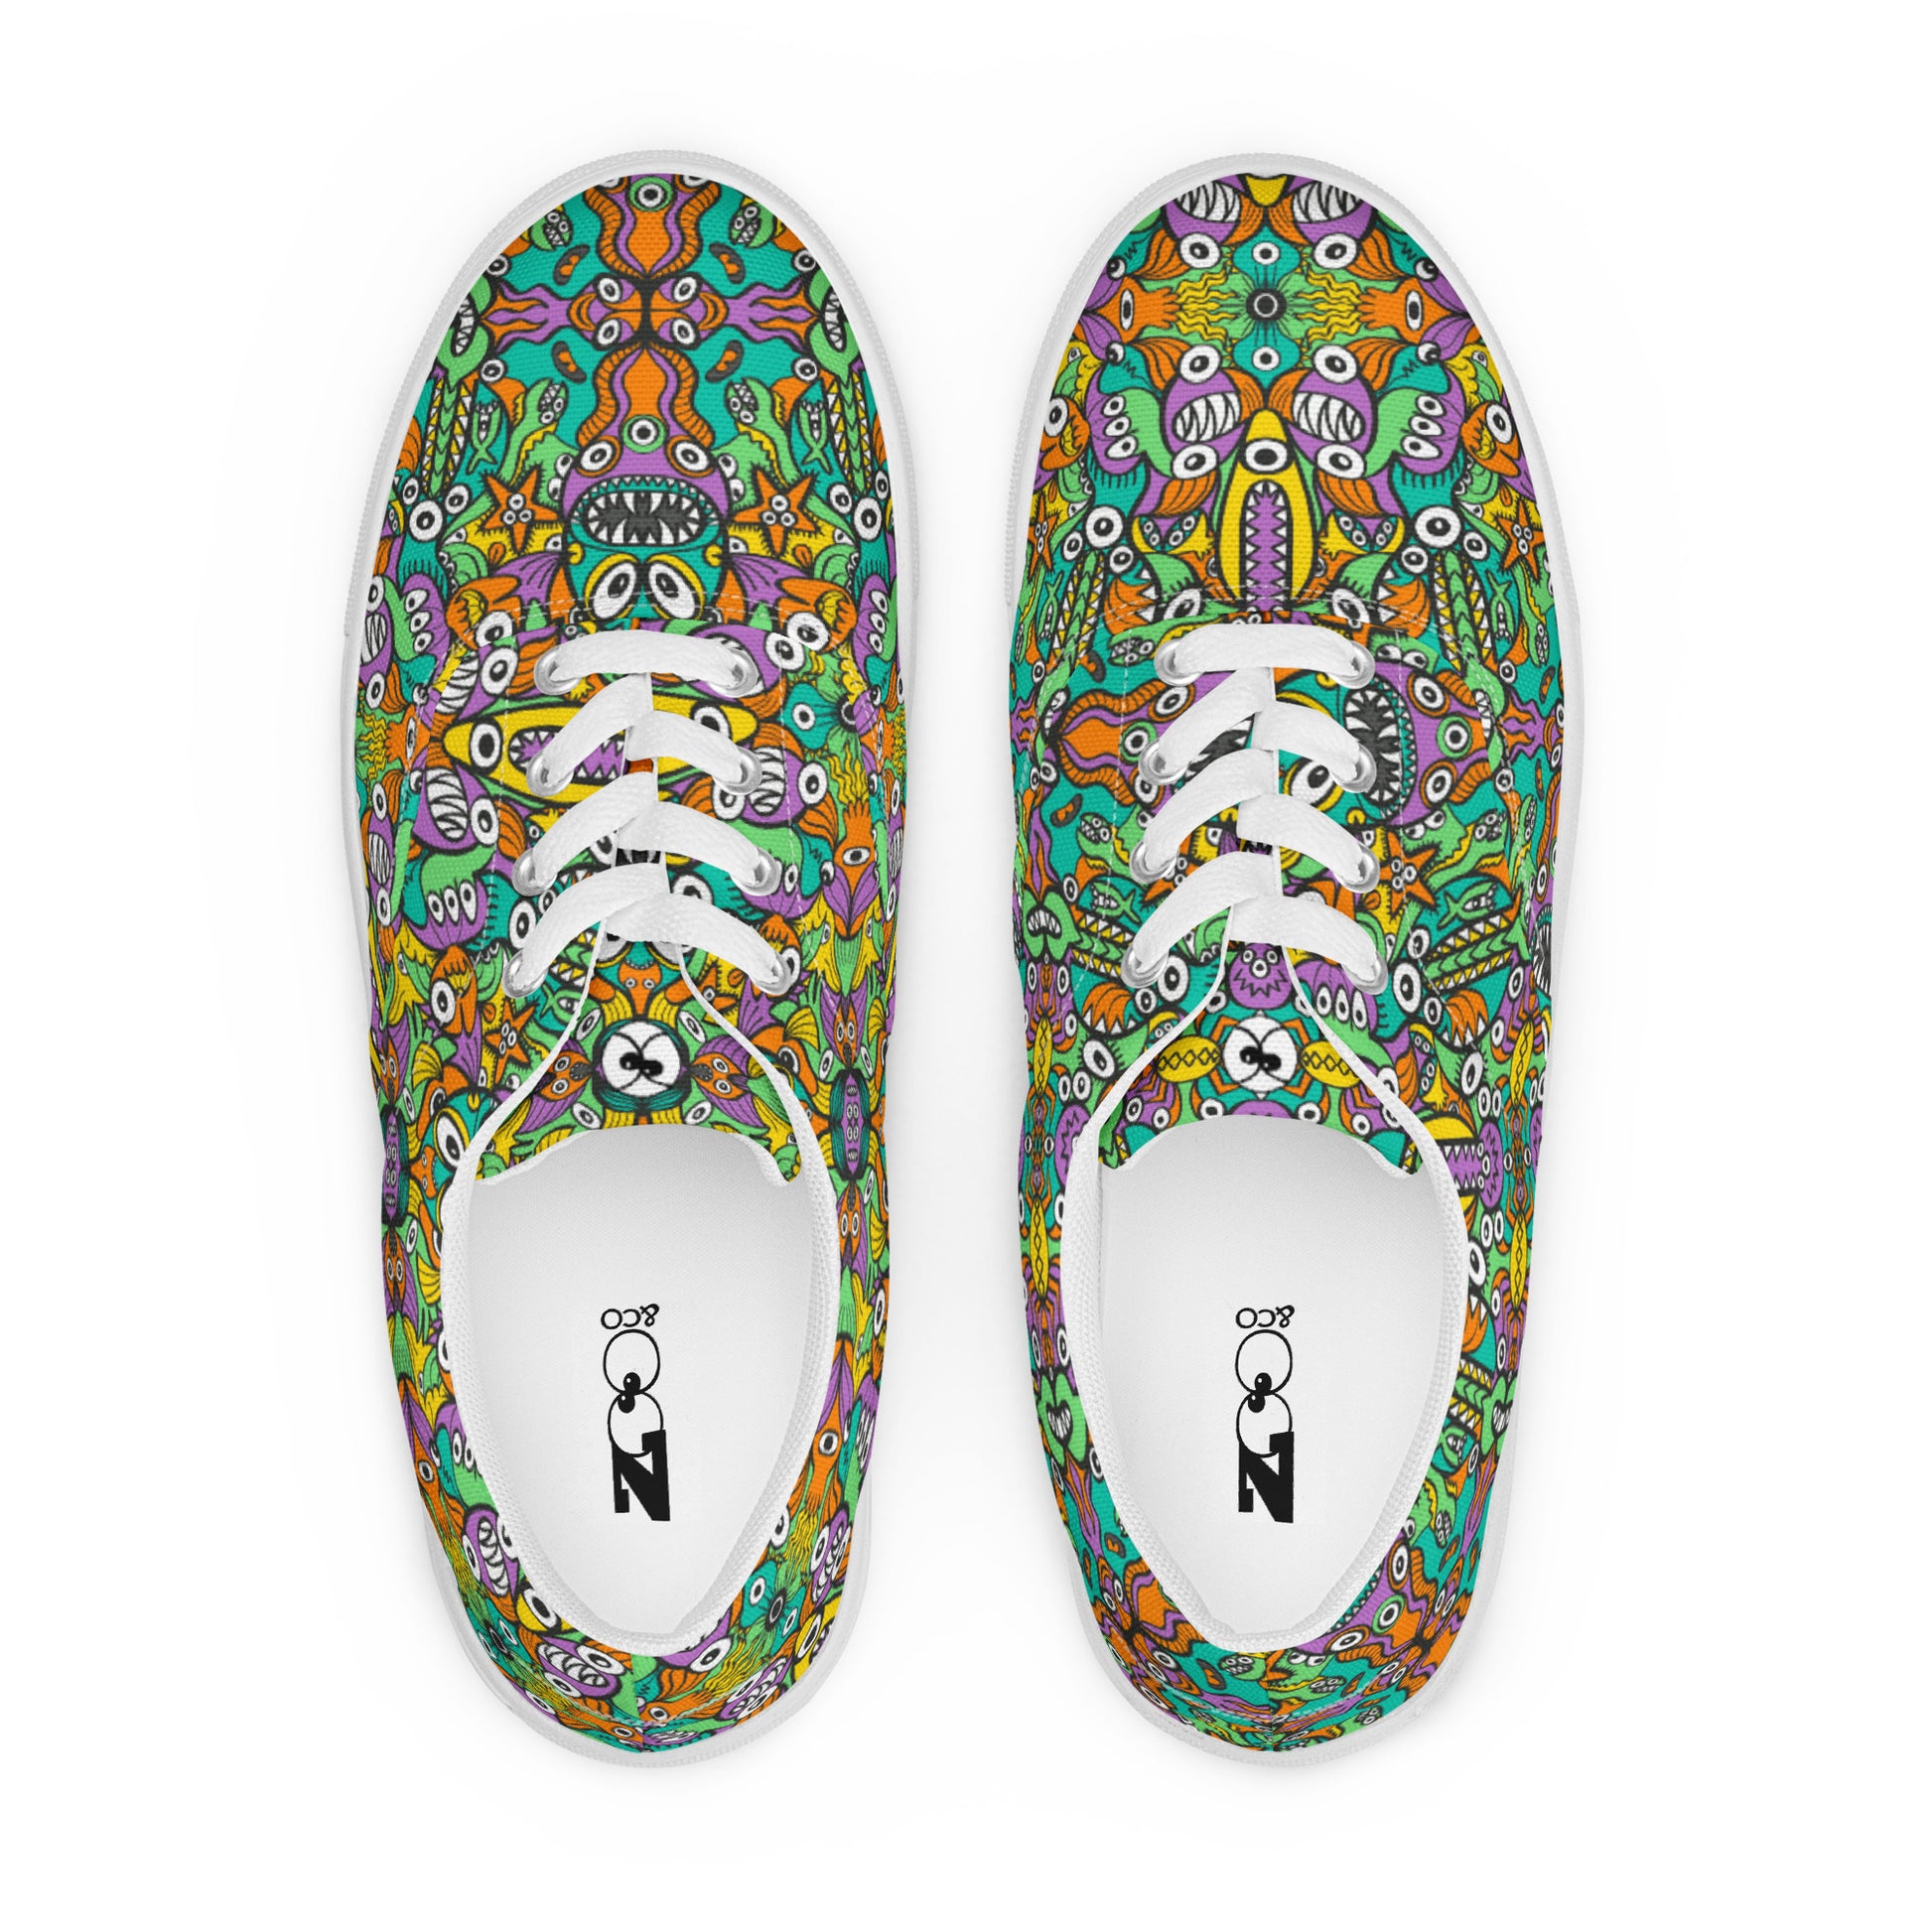 The vast ocean is full of doodle critters Men’s lace-up canvas shoes. Top view